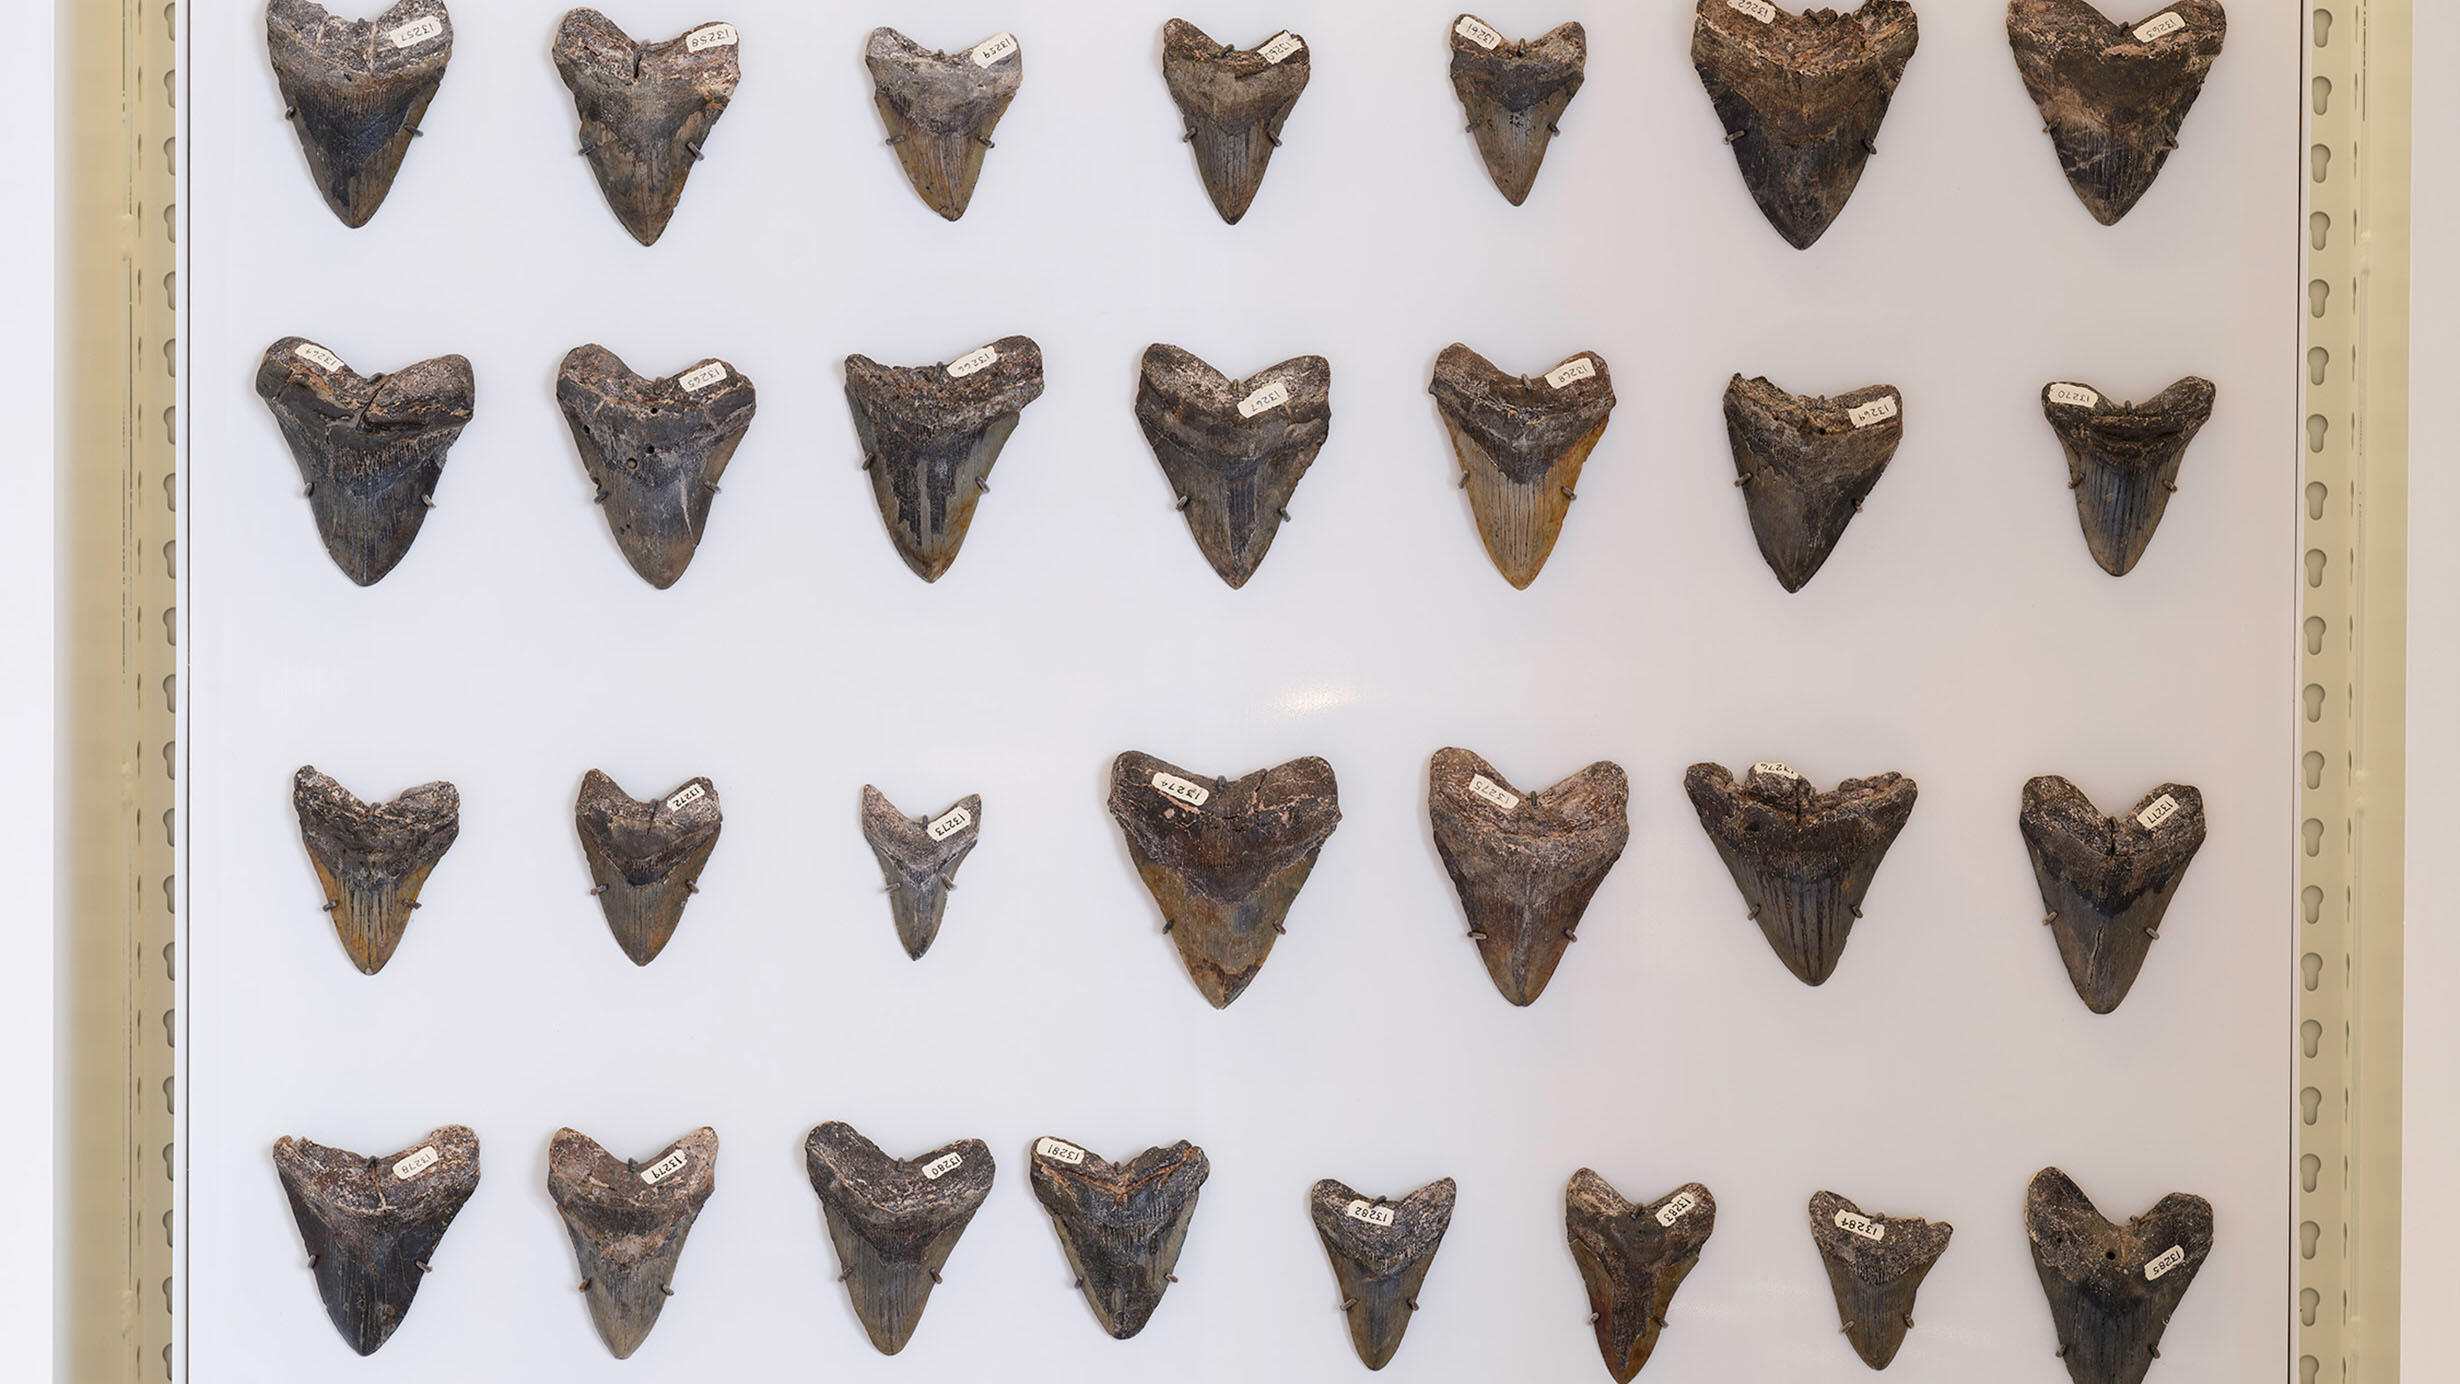 Four rows of 29 total fossilized Megalodon teeth on display in the Collections Core at the Gilder Center.